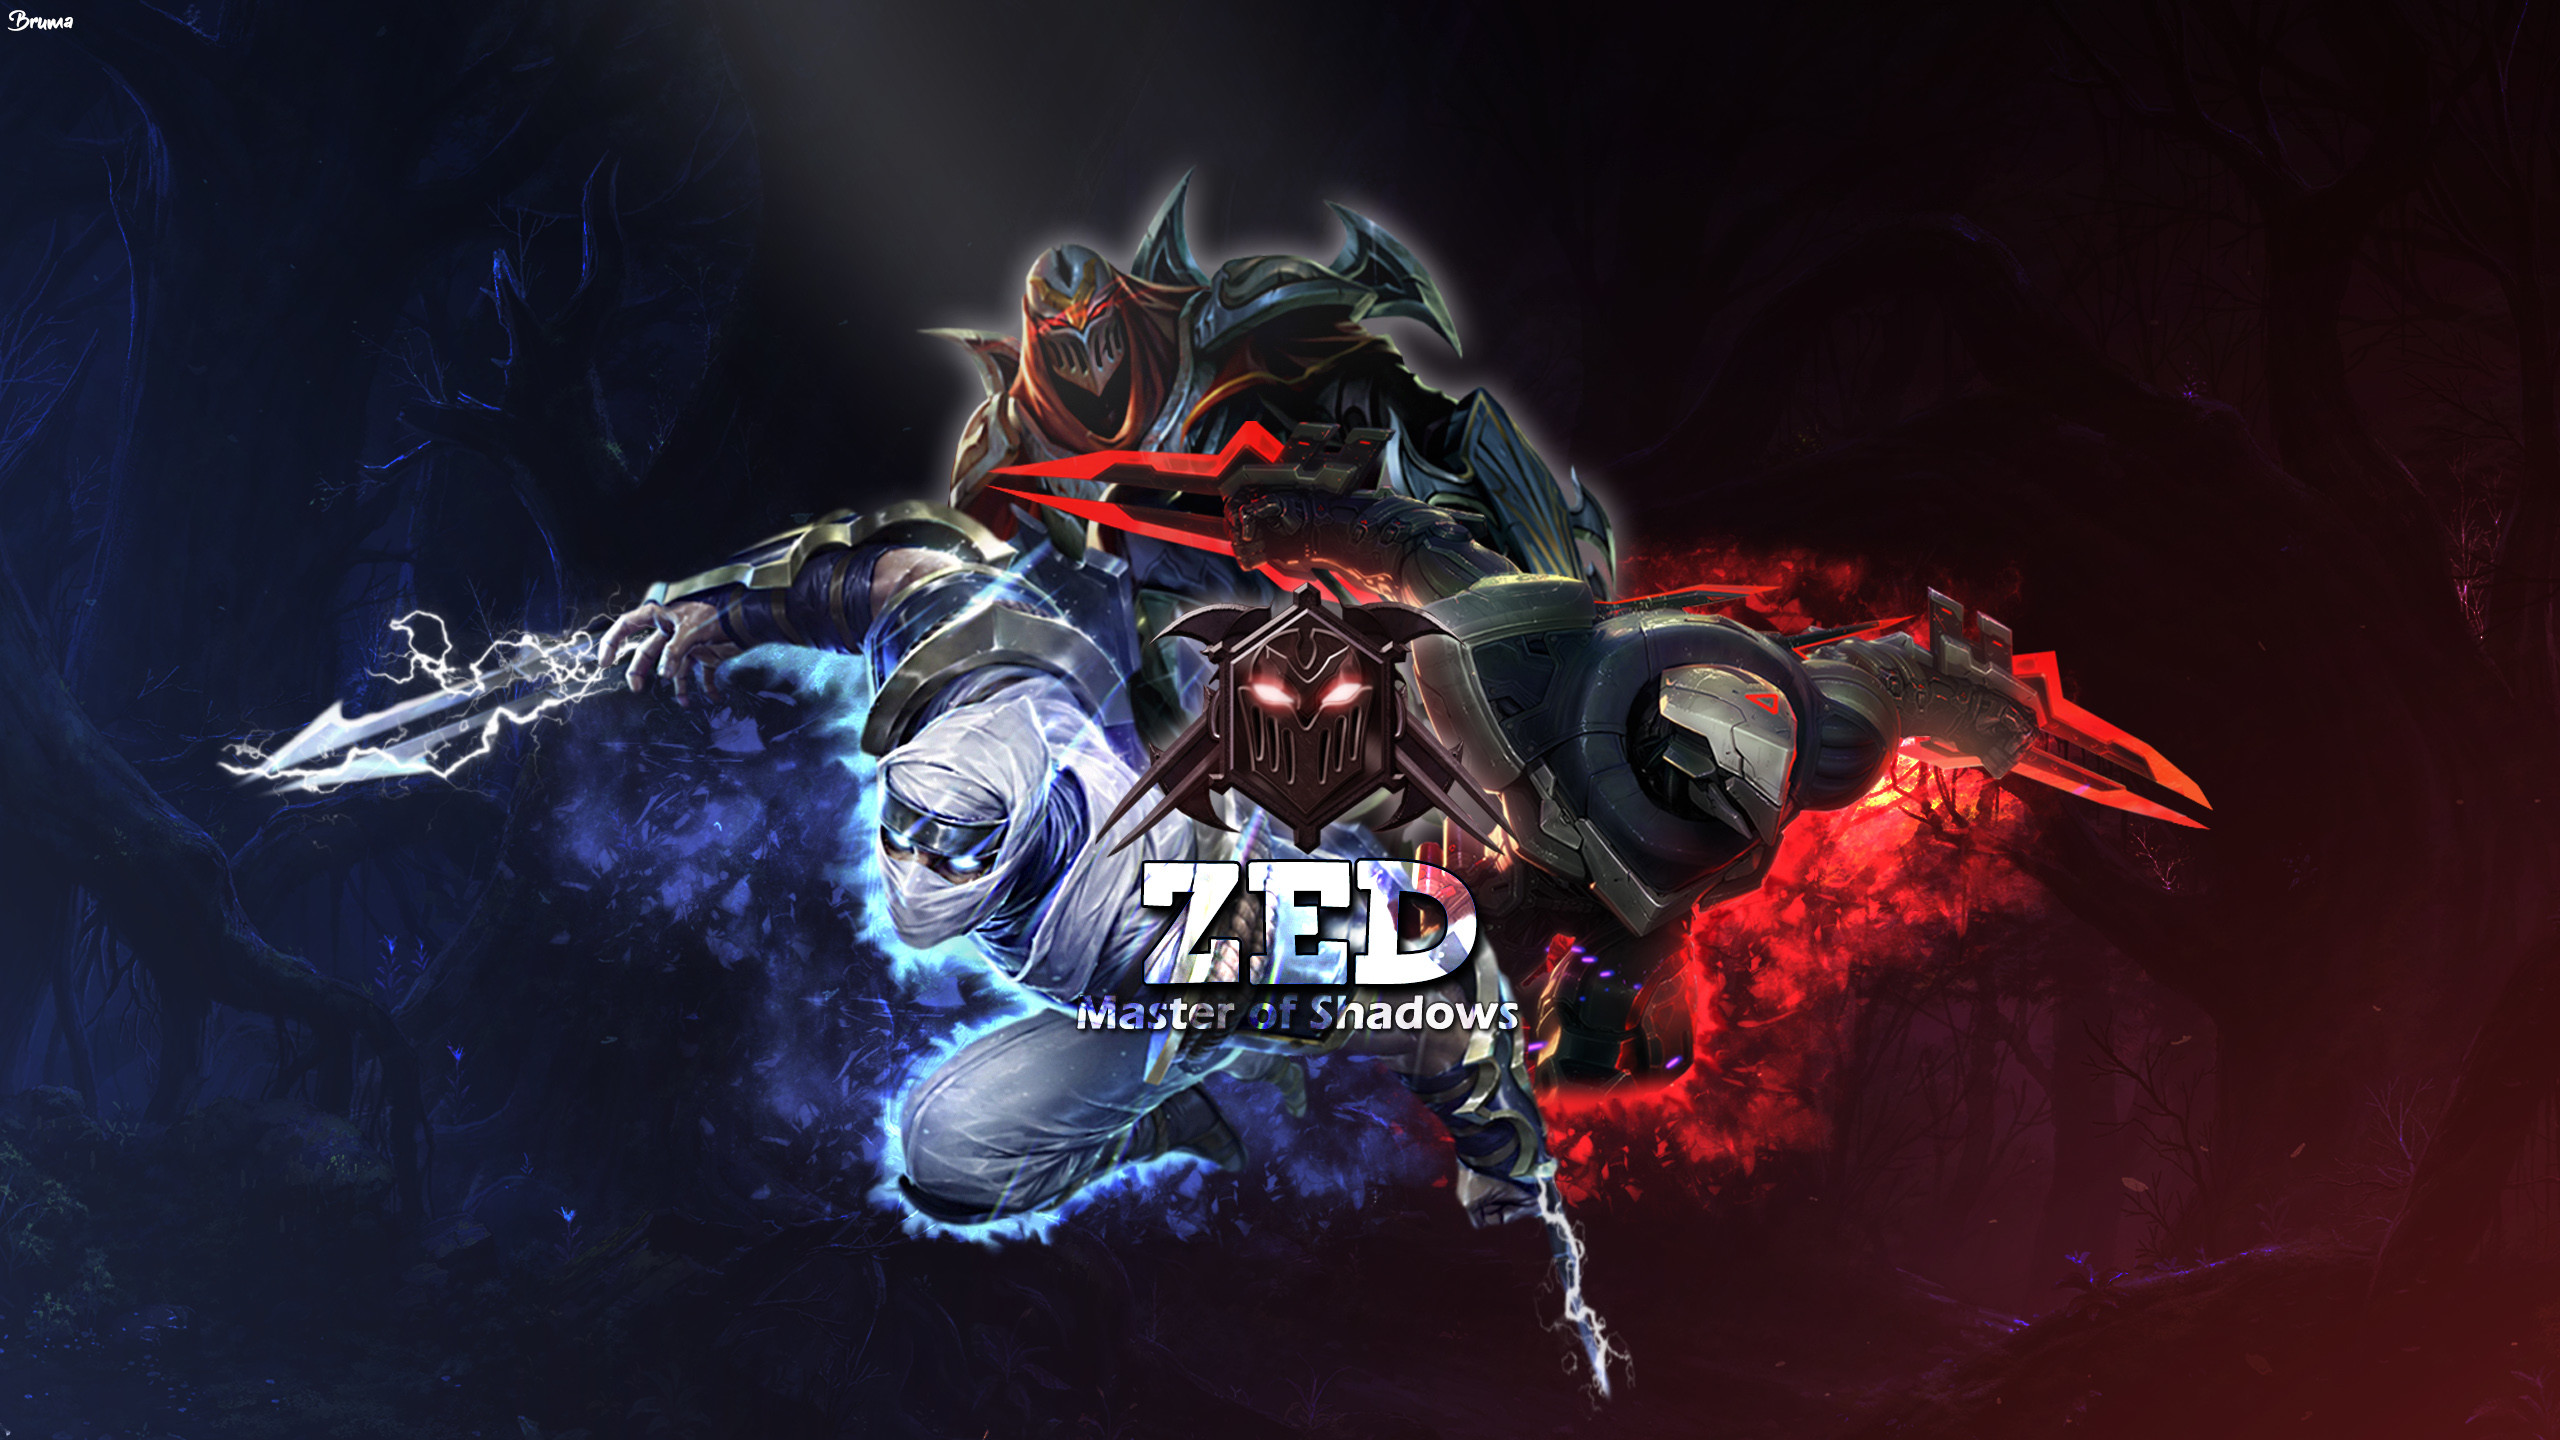 2560x1440 ... zed lol wallpapers hd wallpapers artworks for league of legends ...